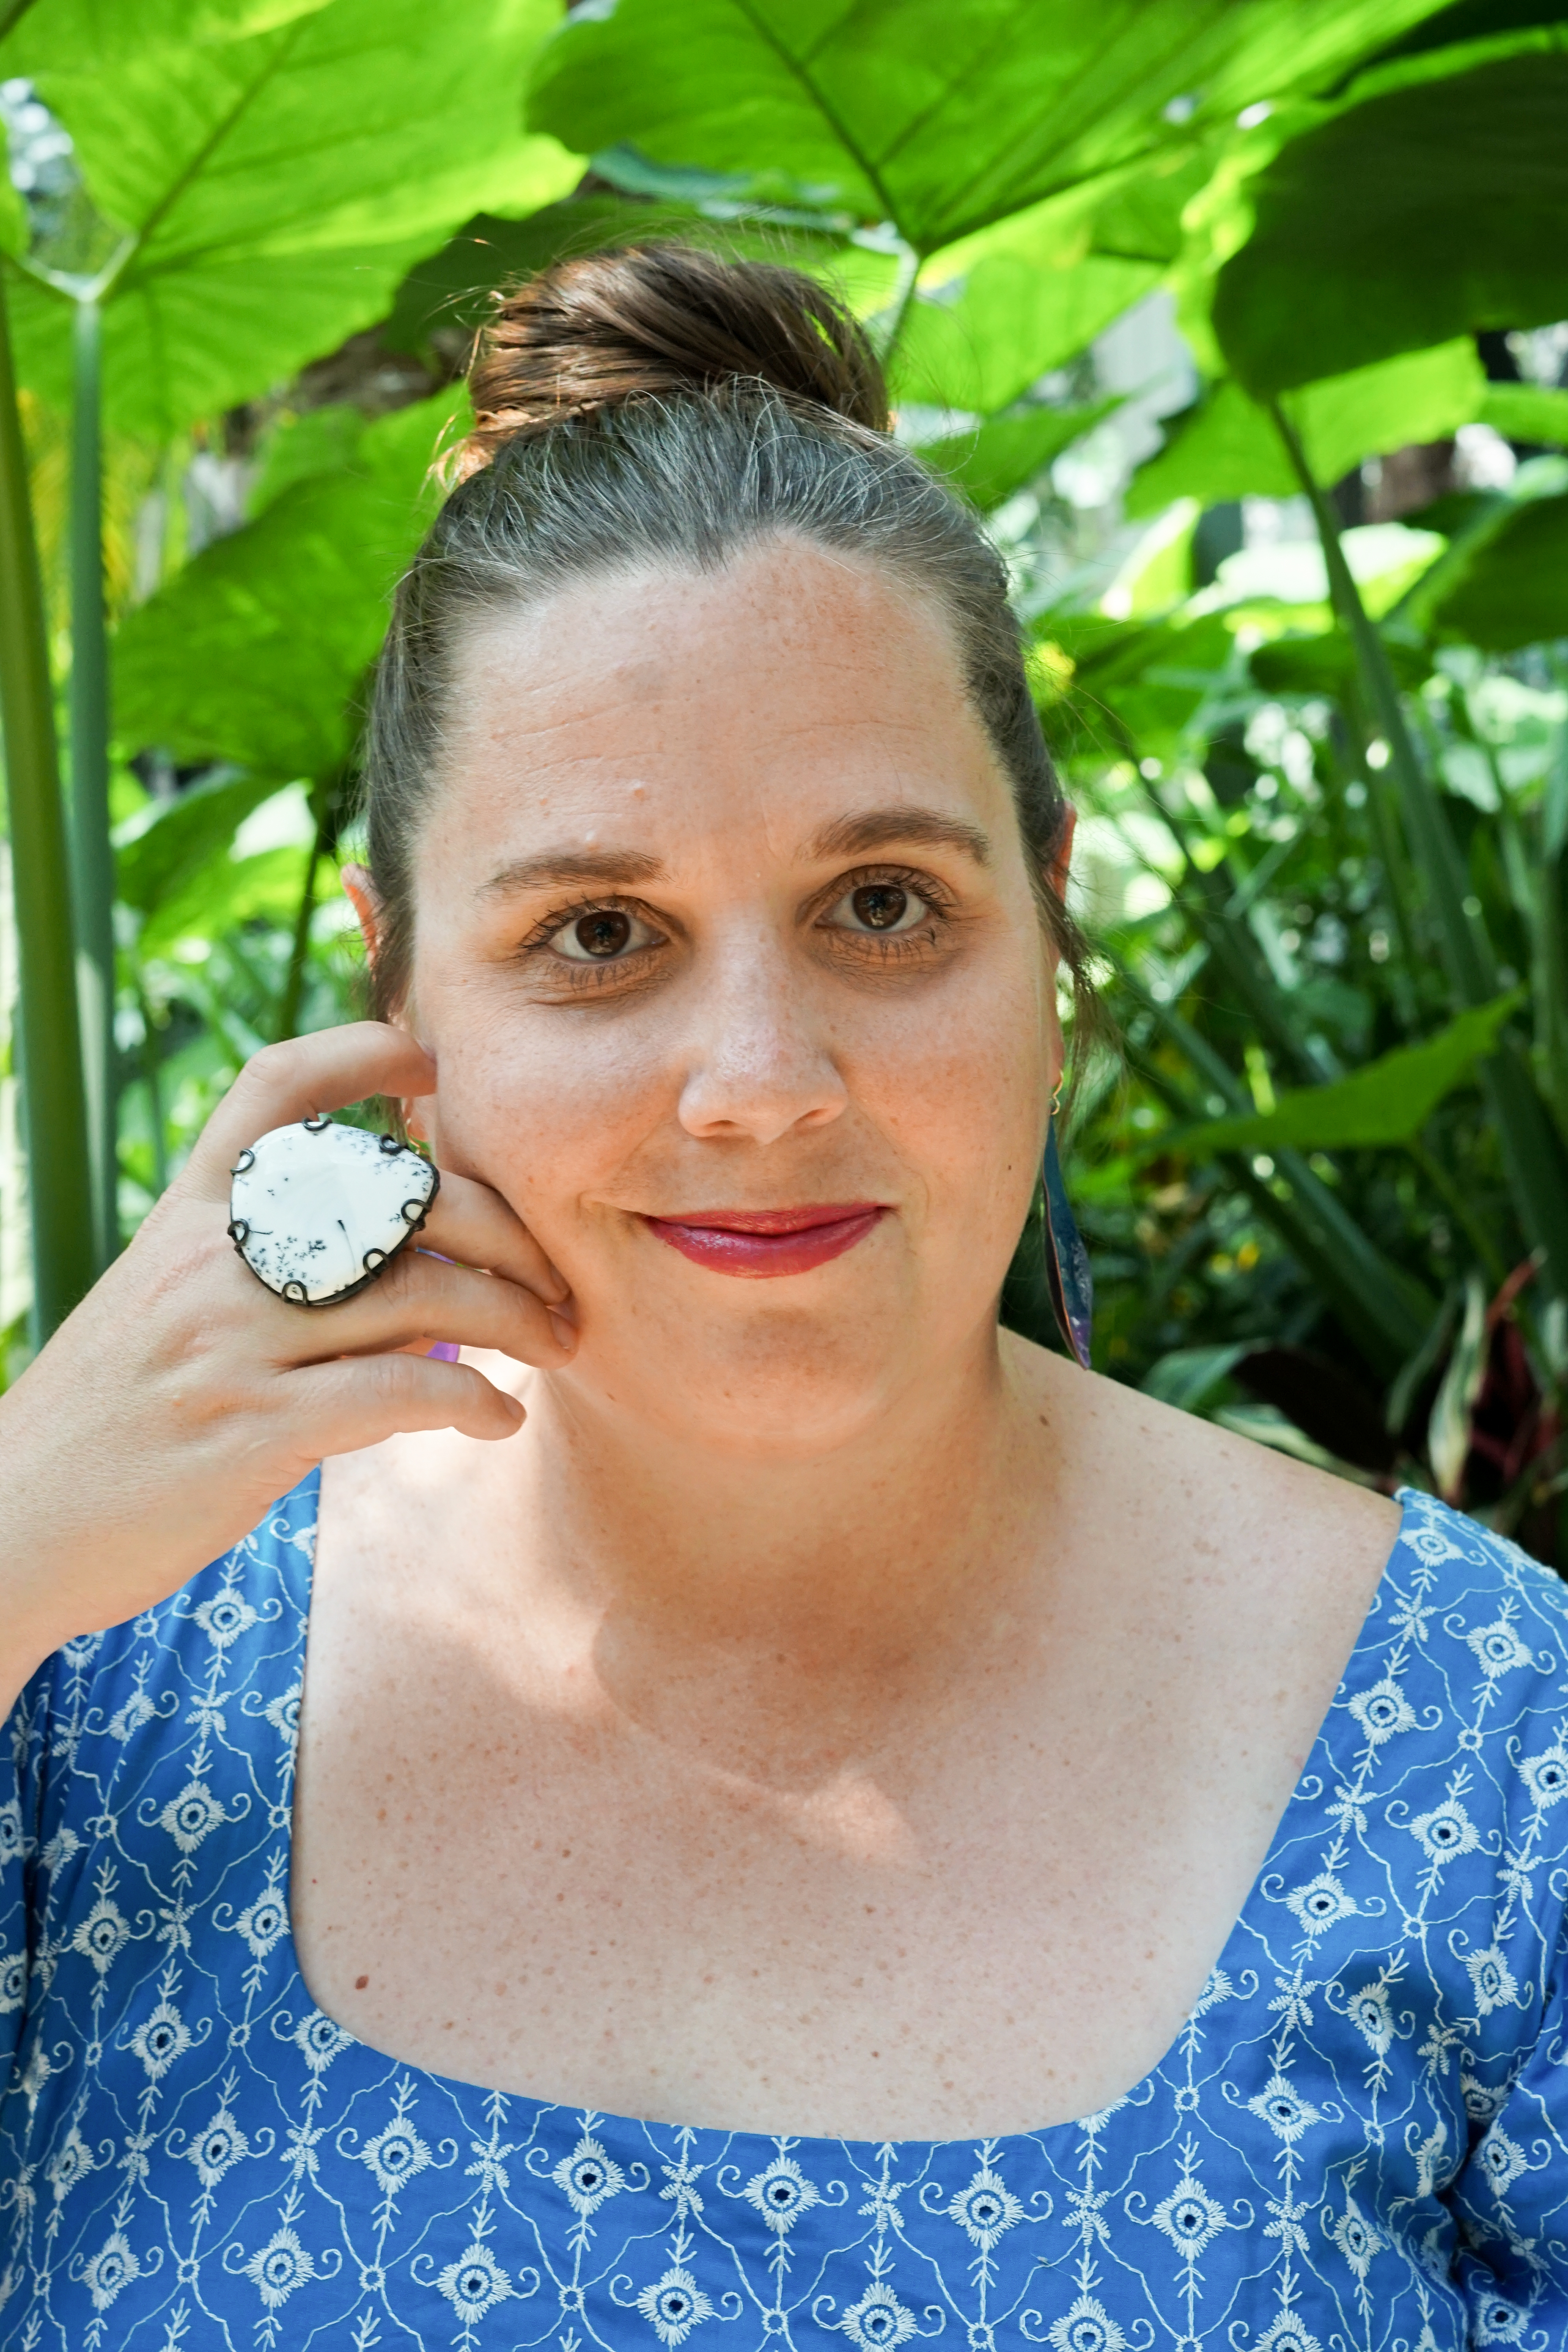 botanical garden portrait with statement ring and earrings